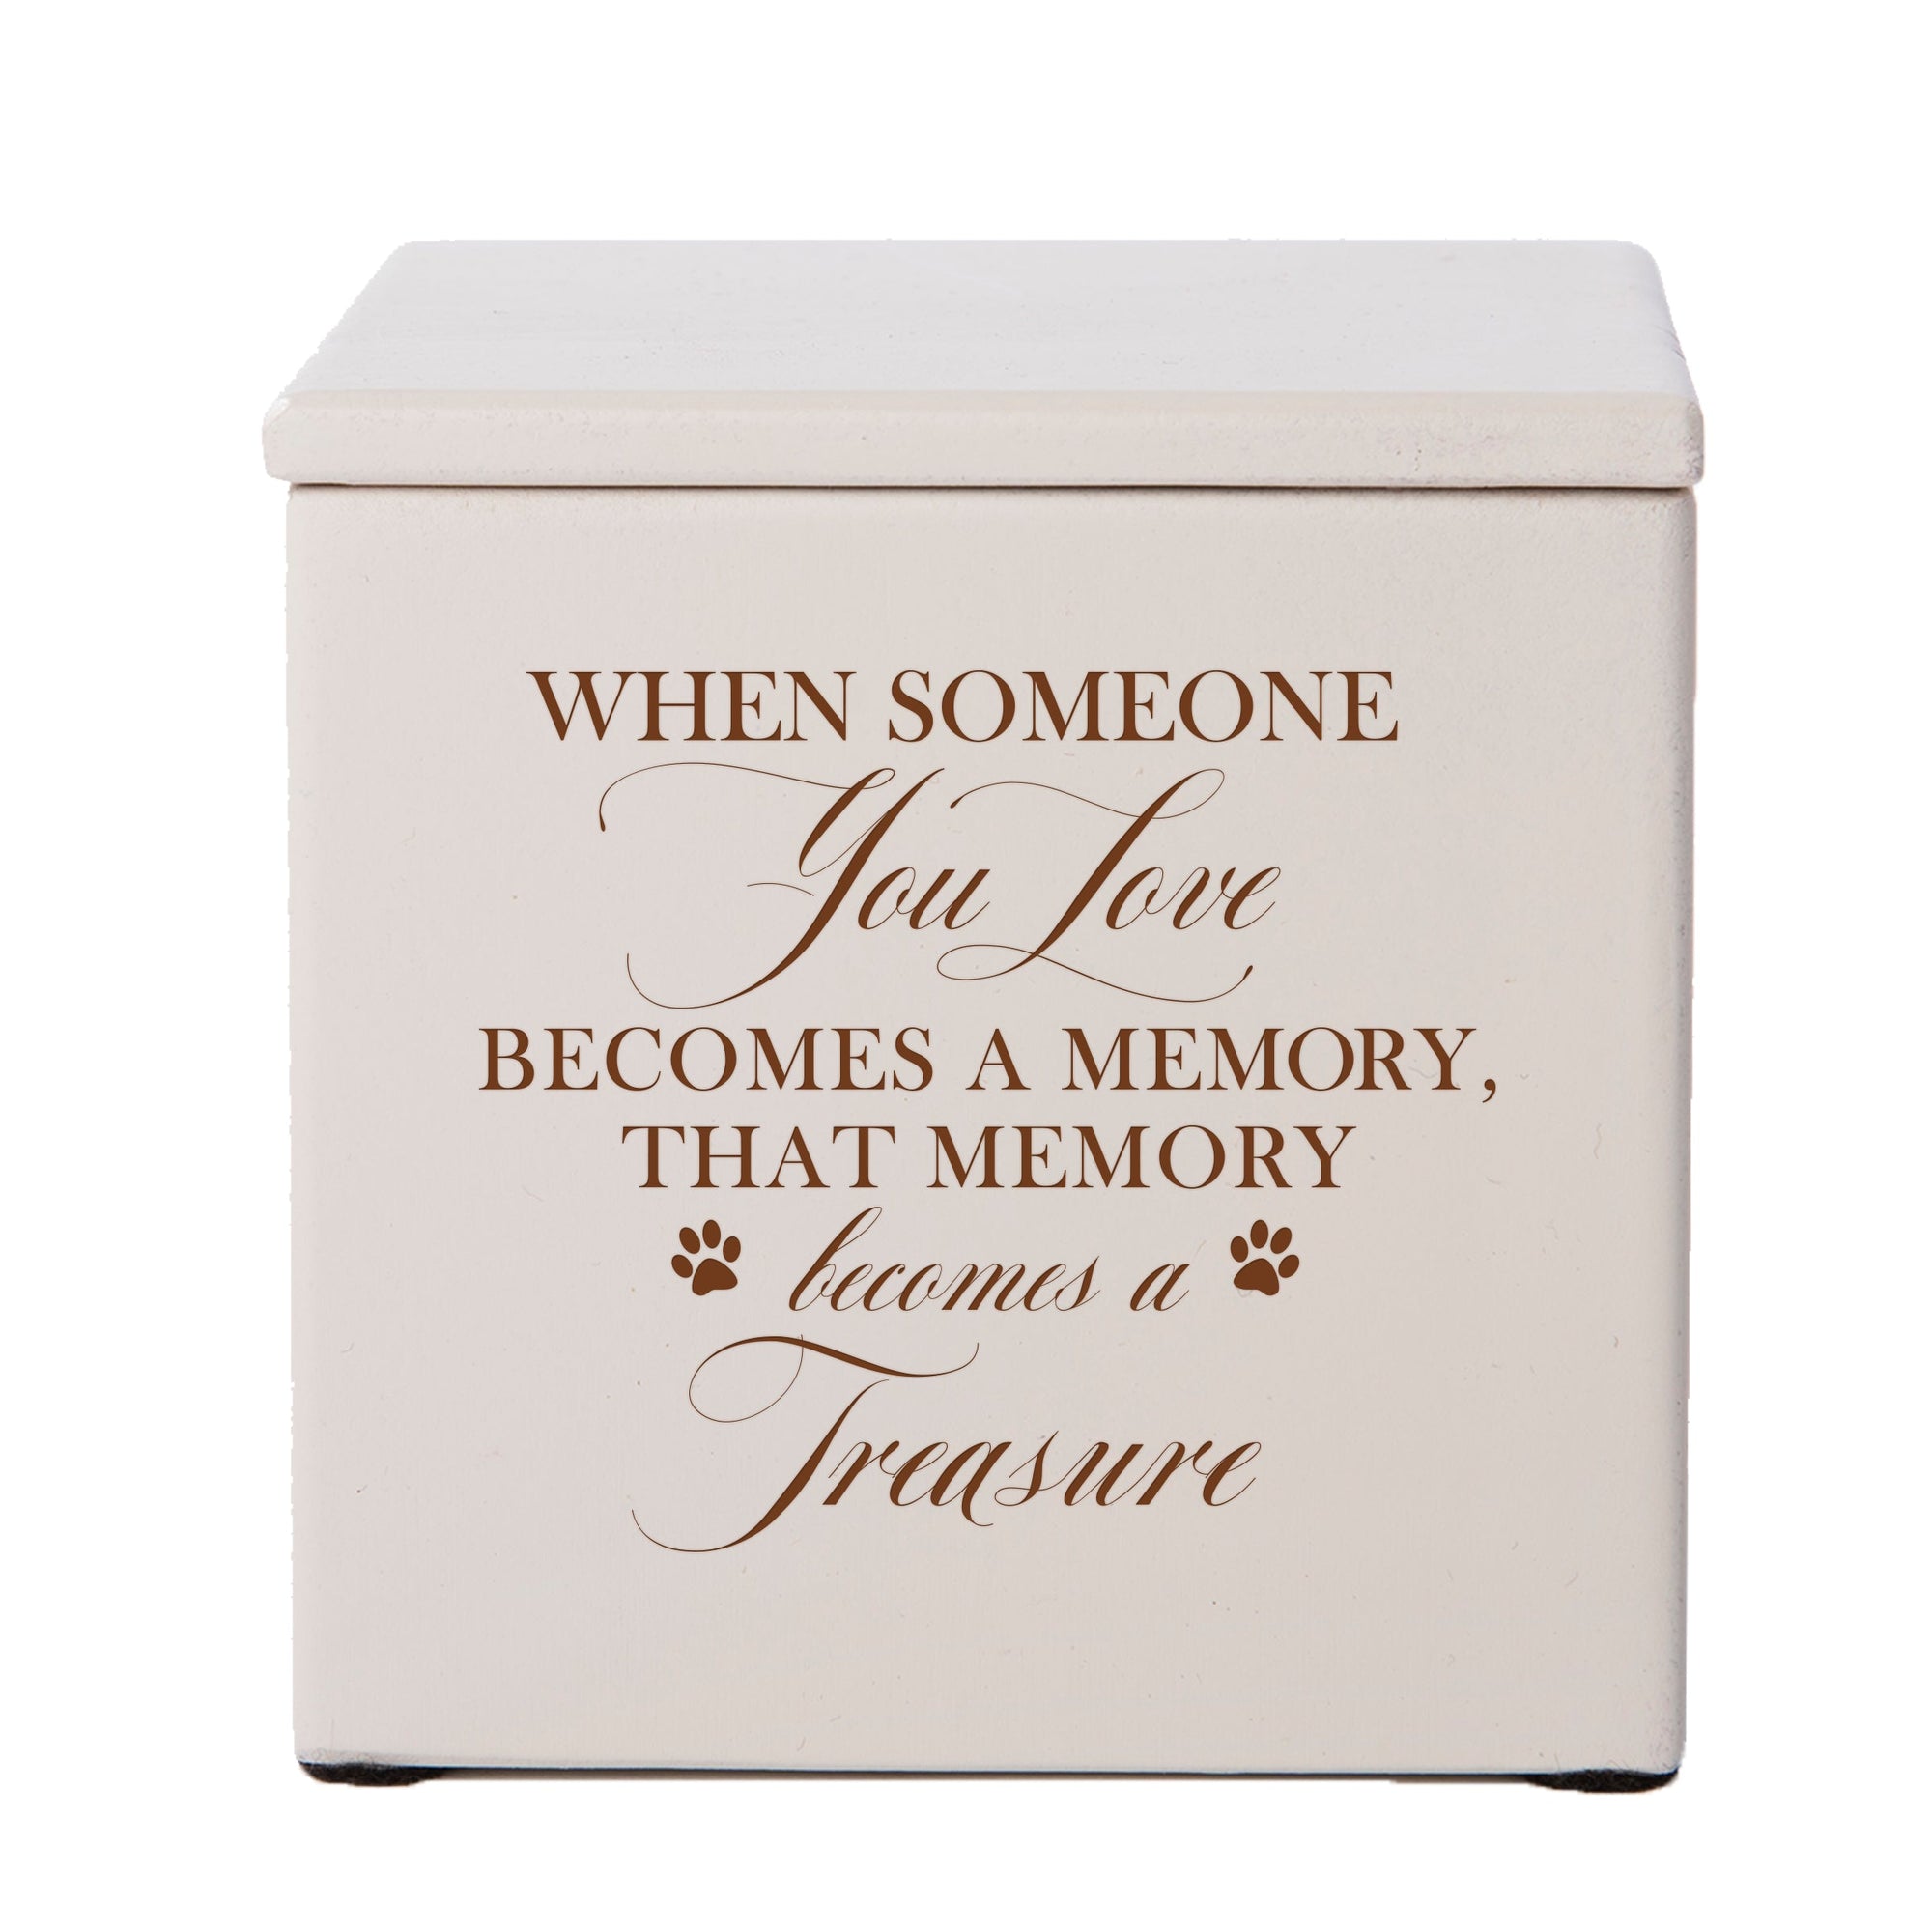 Pet Memorial Keepsake Cremation Urn Box for Dog or Cat - When Someone You Love Becomes A Memory